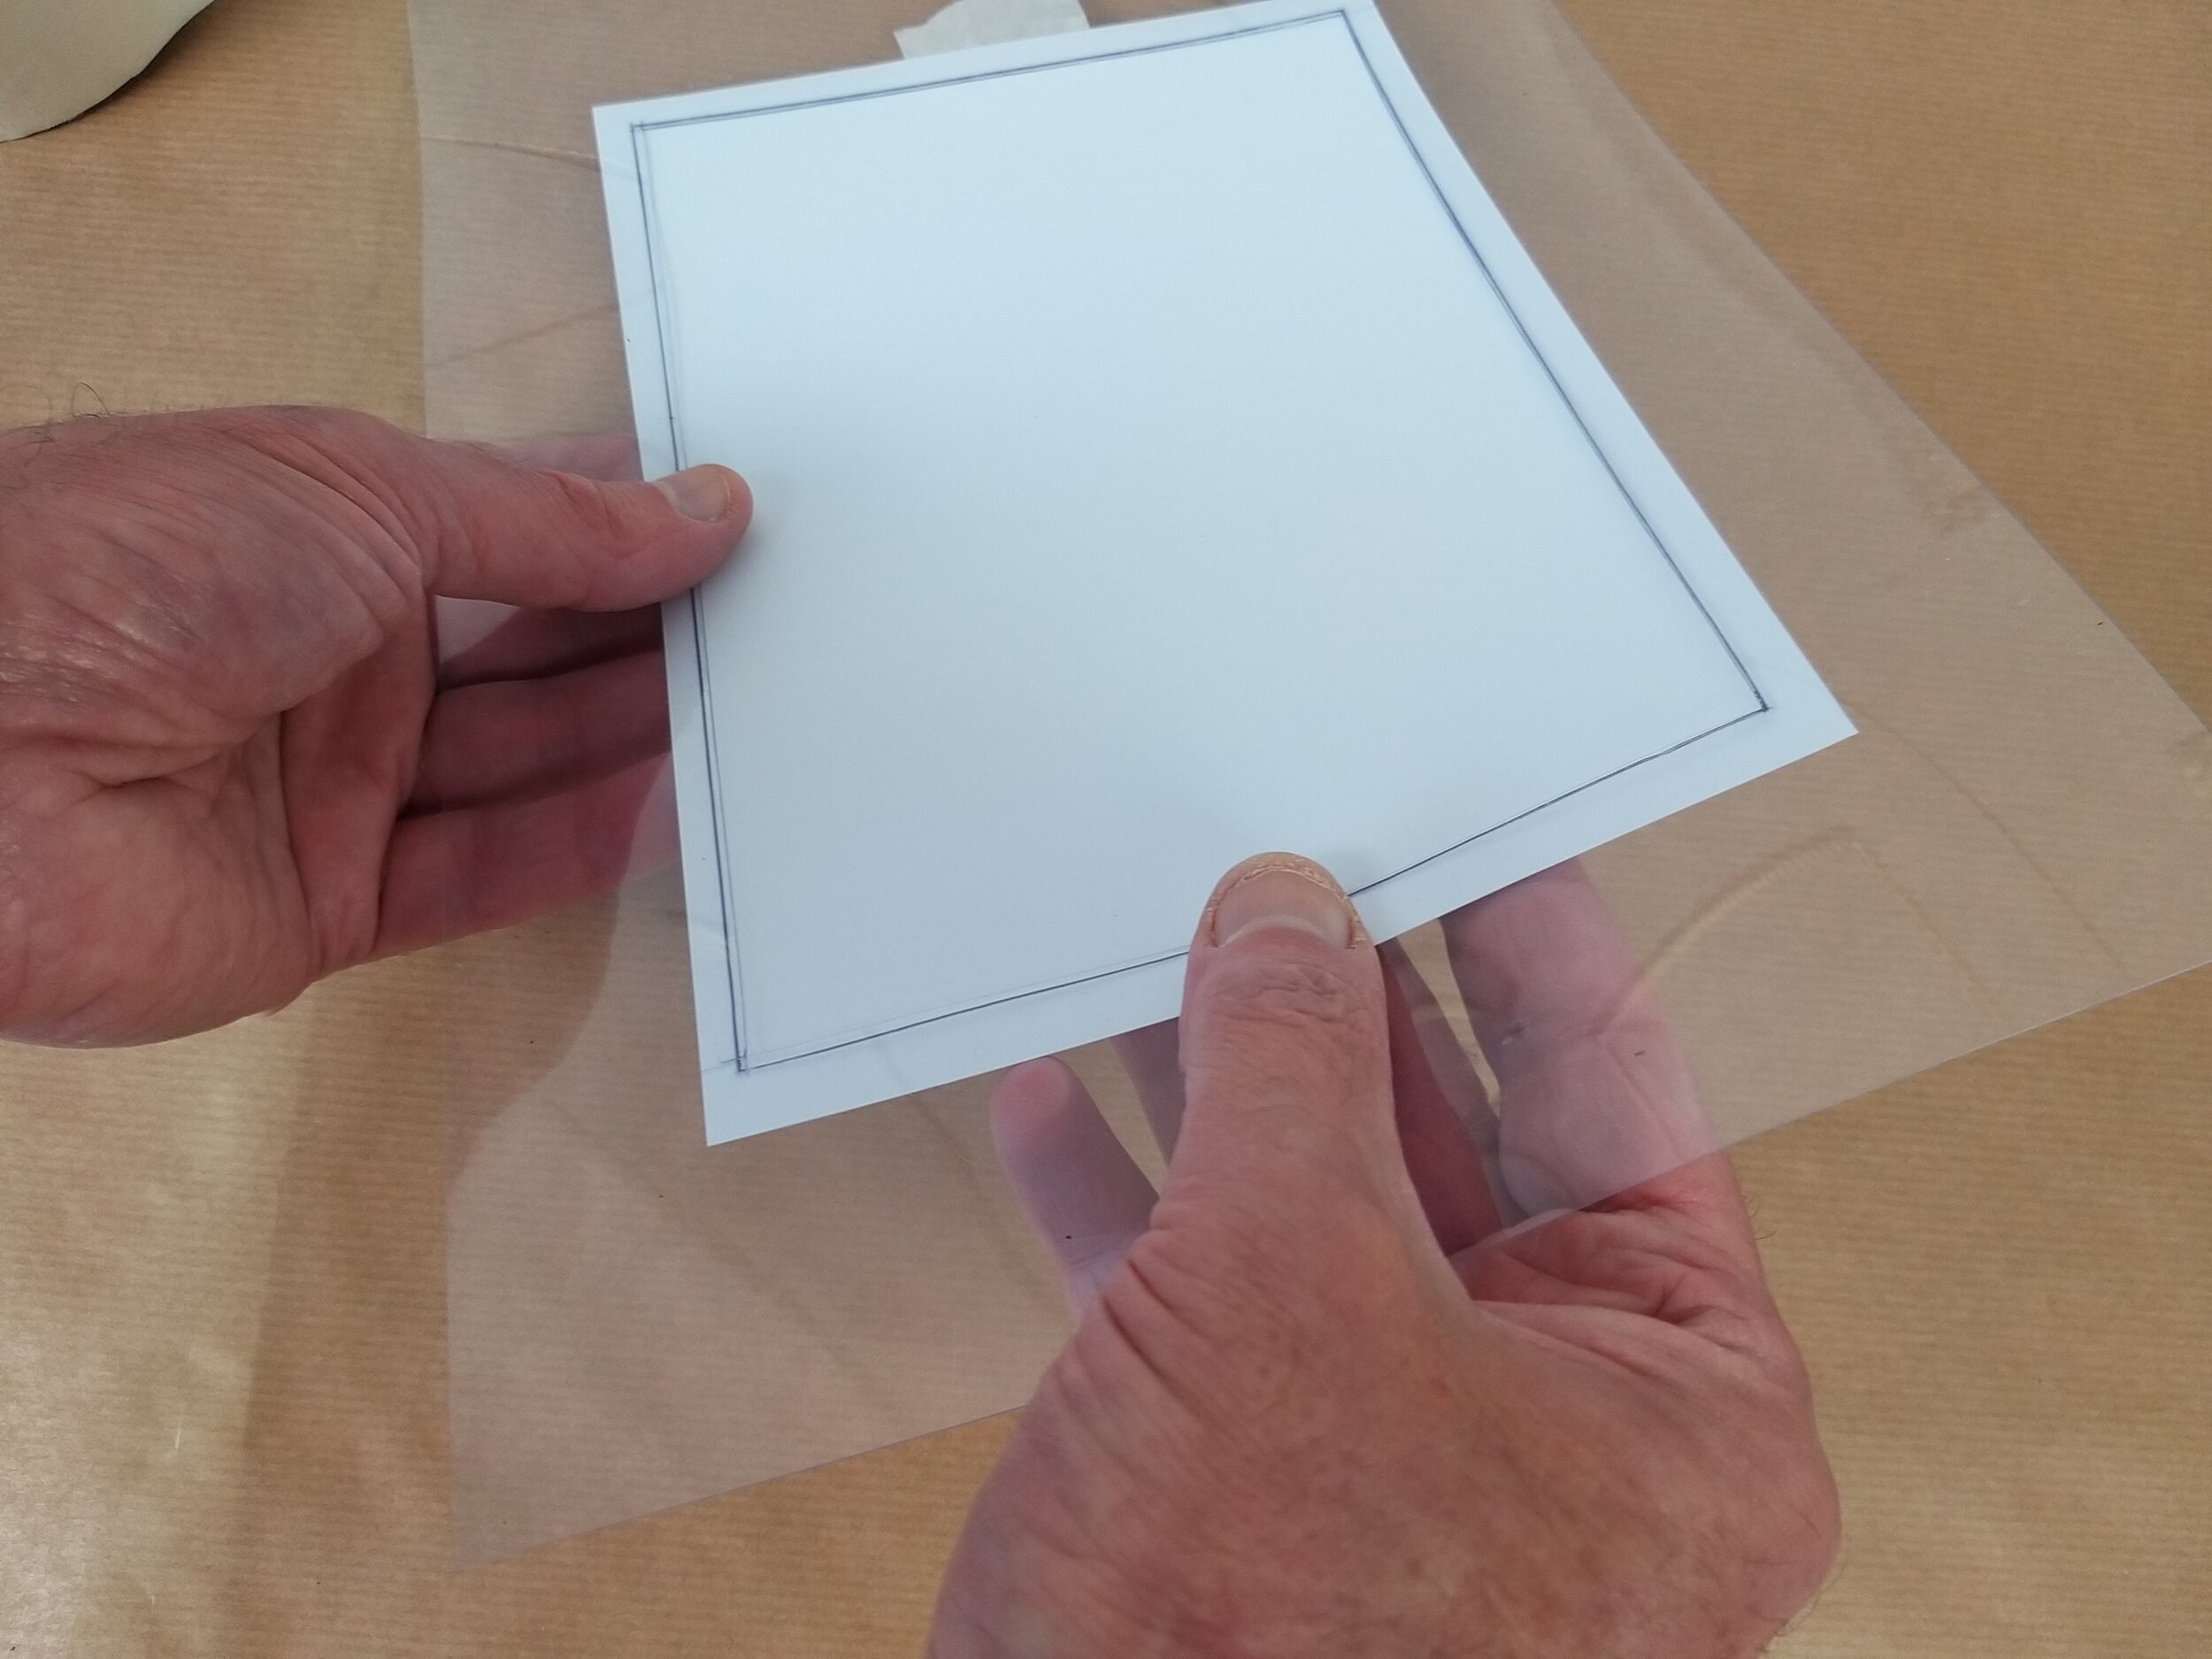  The transparent frame makes it easy to line up the edges of the paper making an accurate border. 